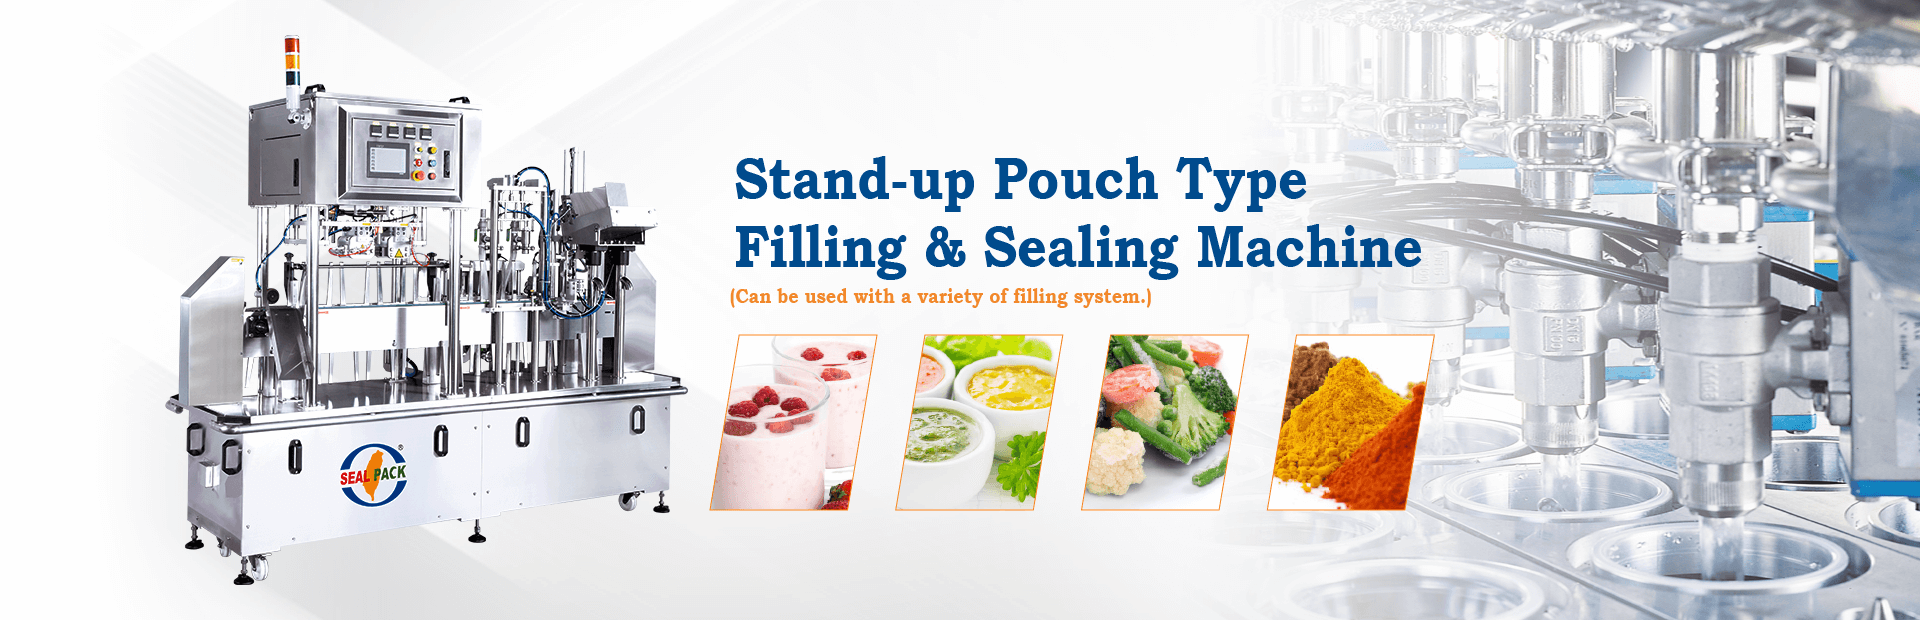 Seal Pack Technology - Professional Manufacturer of Customize Filling Machine and Sealing Machines